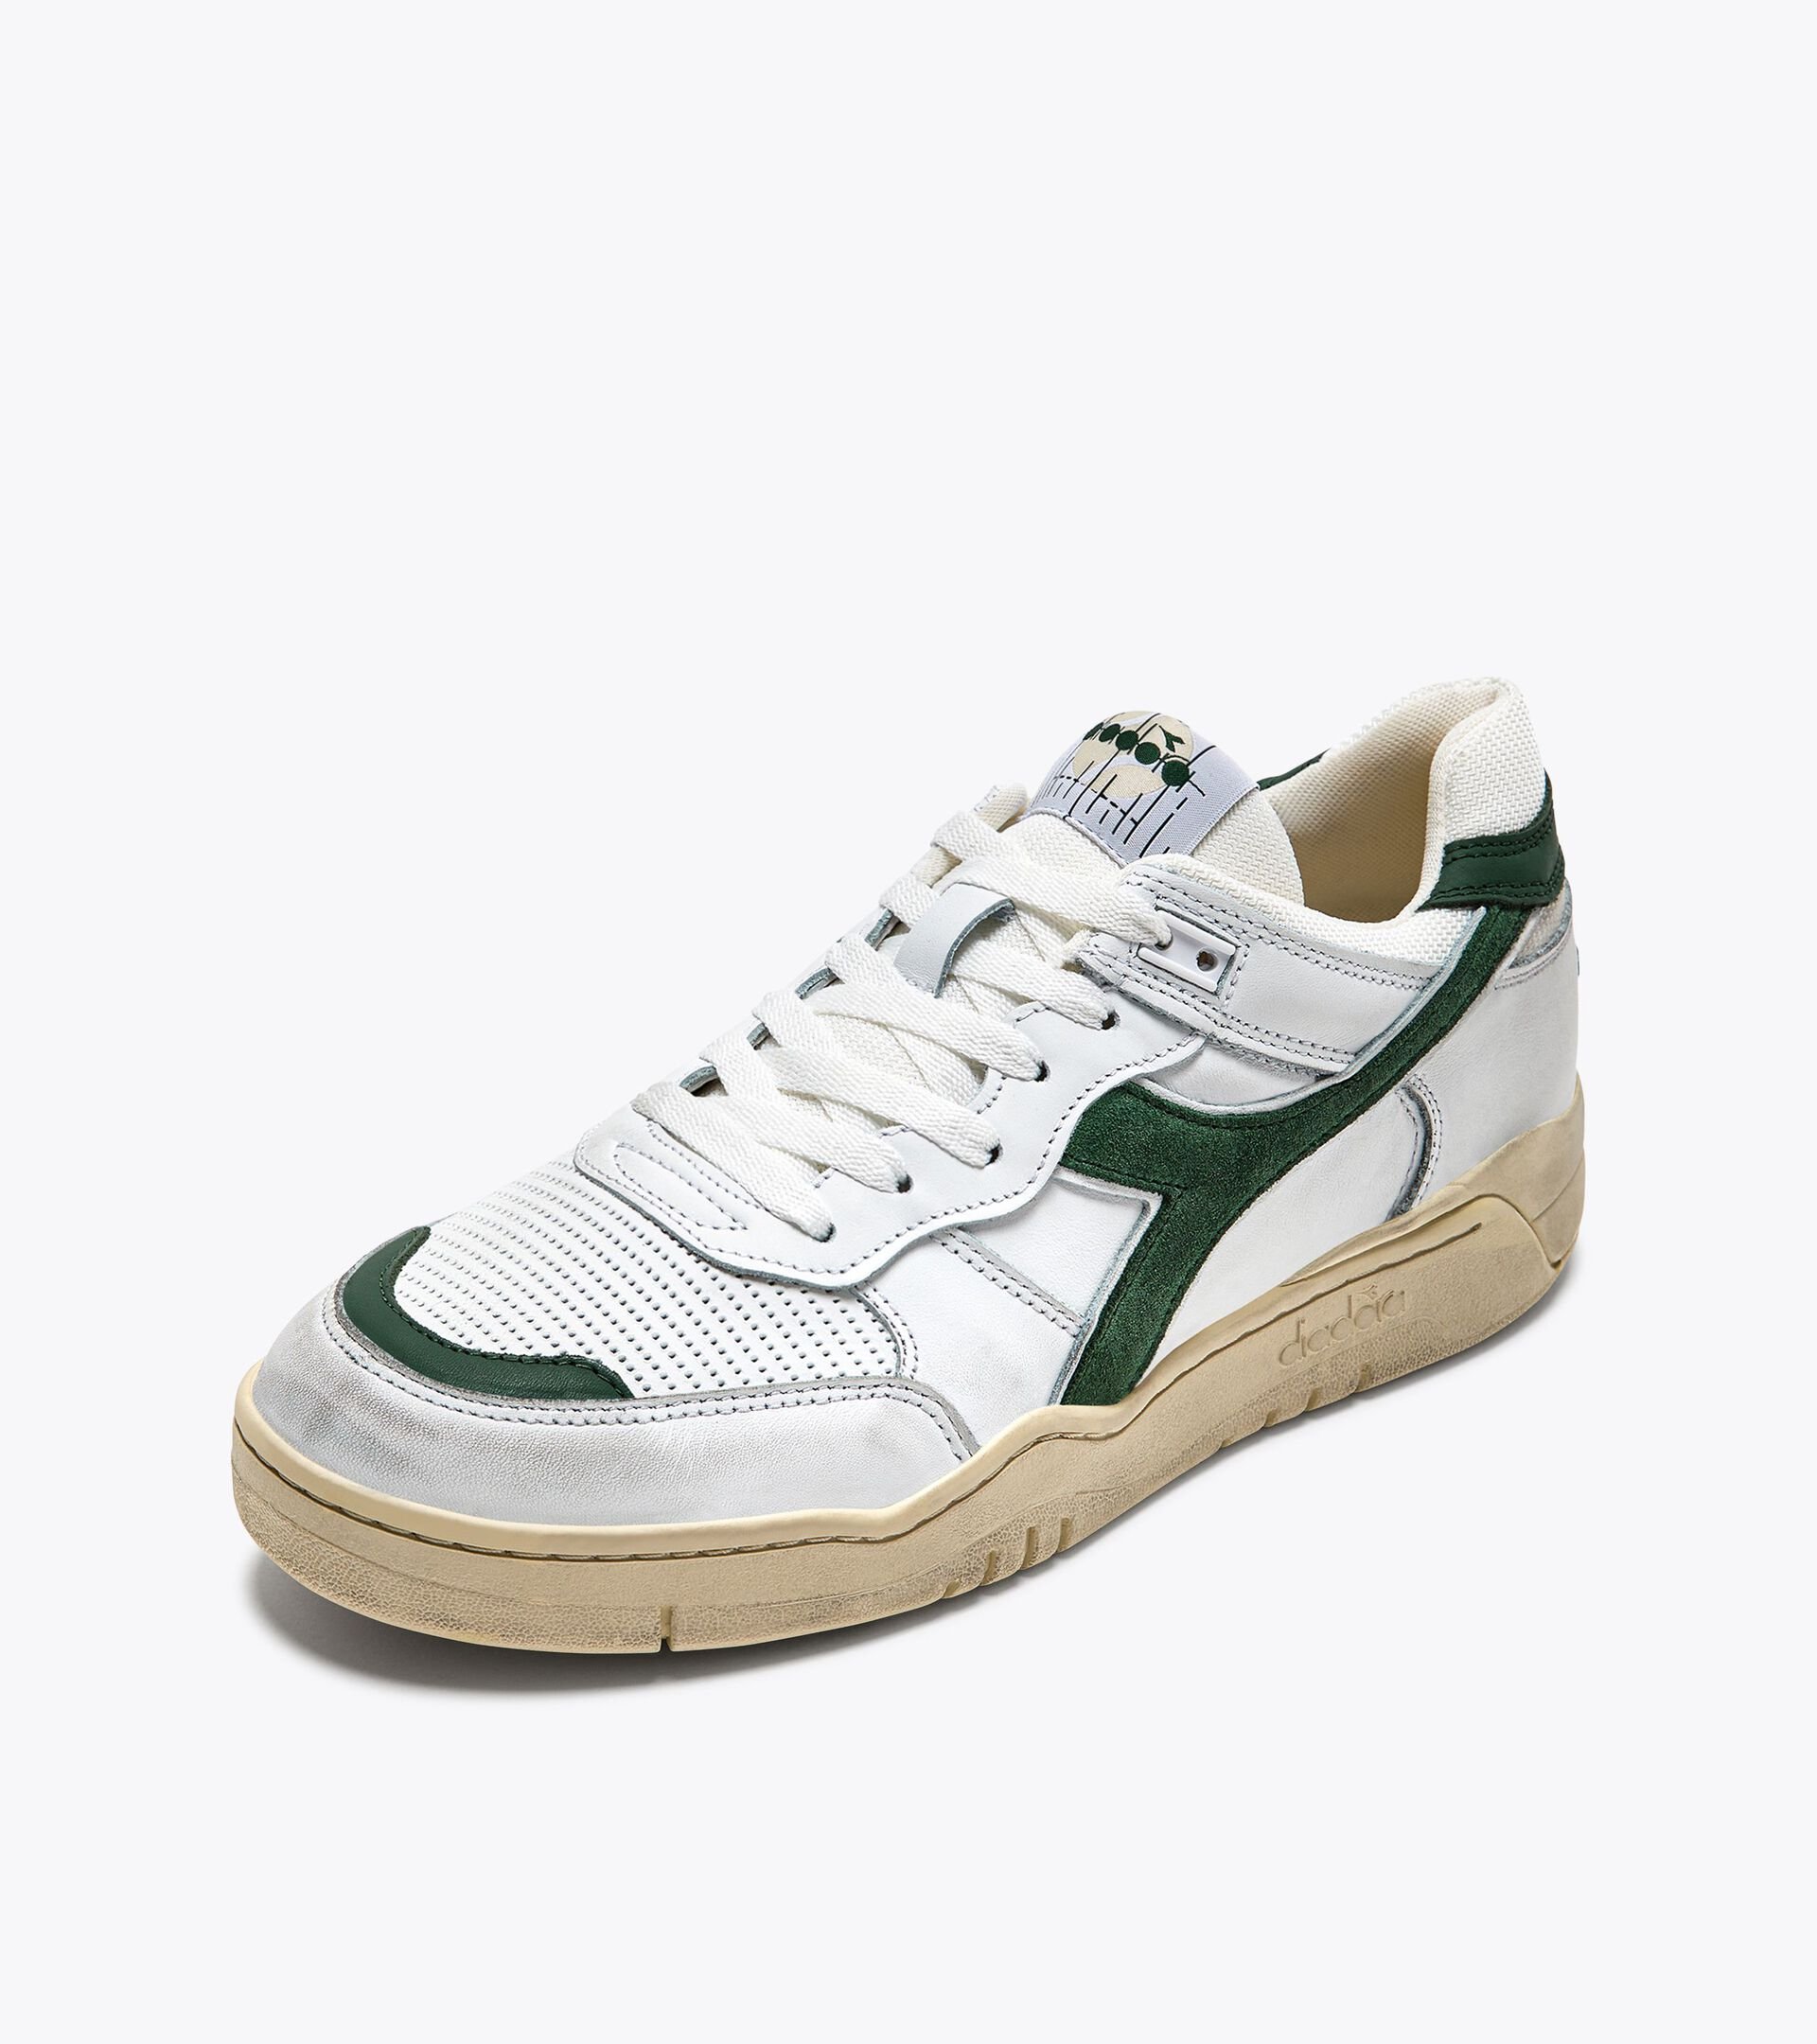 Chaussures Heritage - Gender neutral B.560 USED BLC/VERTS PATURAGES - Diadora